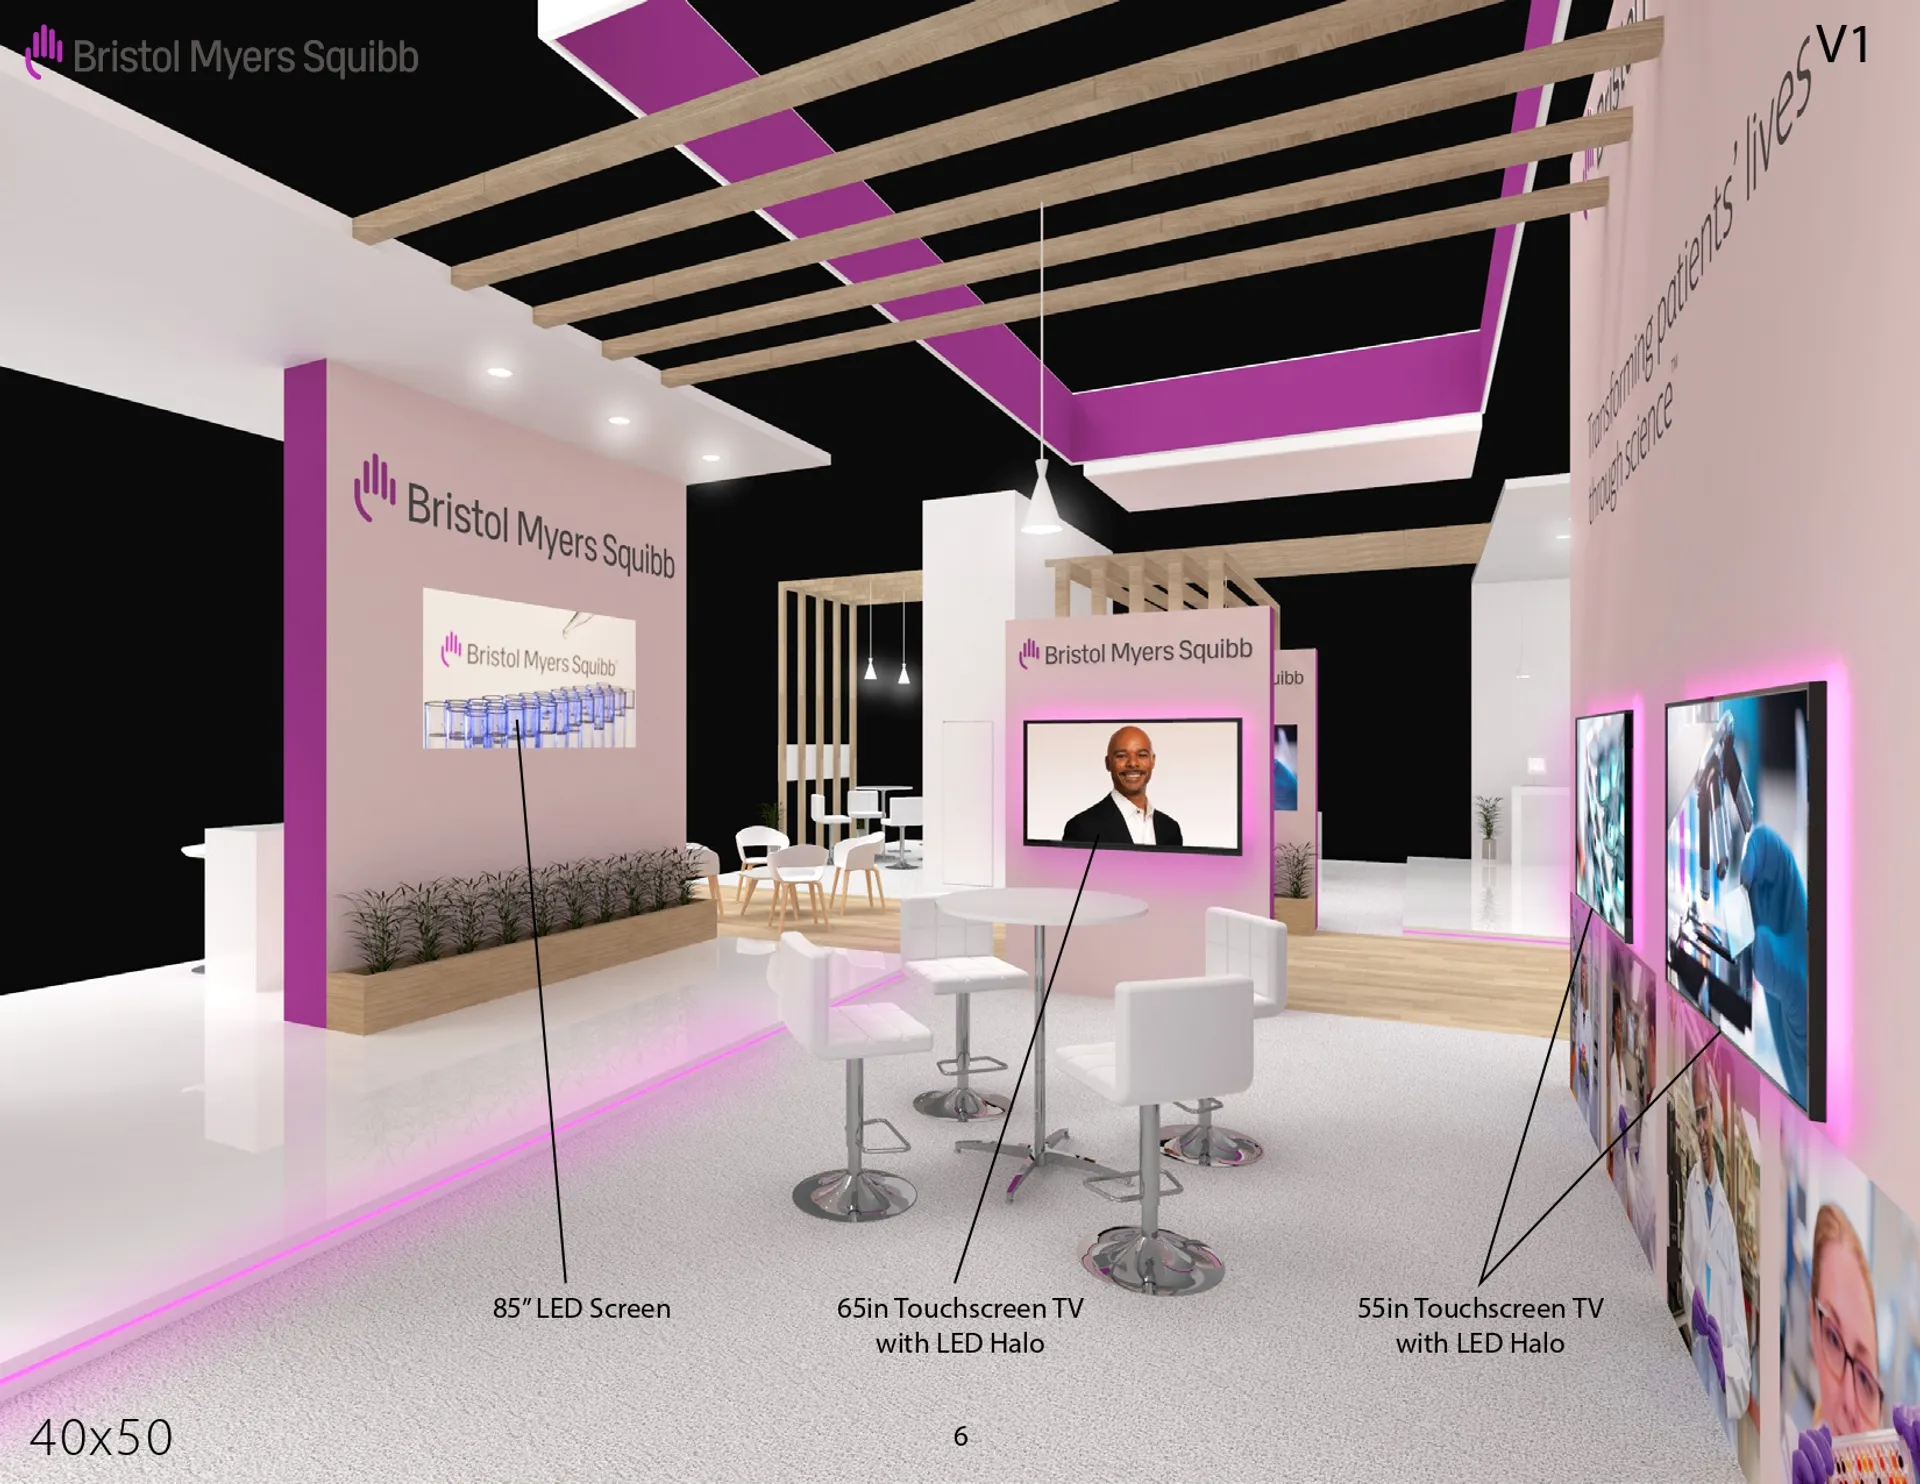 booth-design-projects/Pro-X Exhibits/2024-04-11-40x50-ISLAND-Project-45/BRISTOL_MYERS_SQUIBB_40x50_V1-1-14-6_page-0001-jfyra.jpg